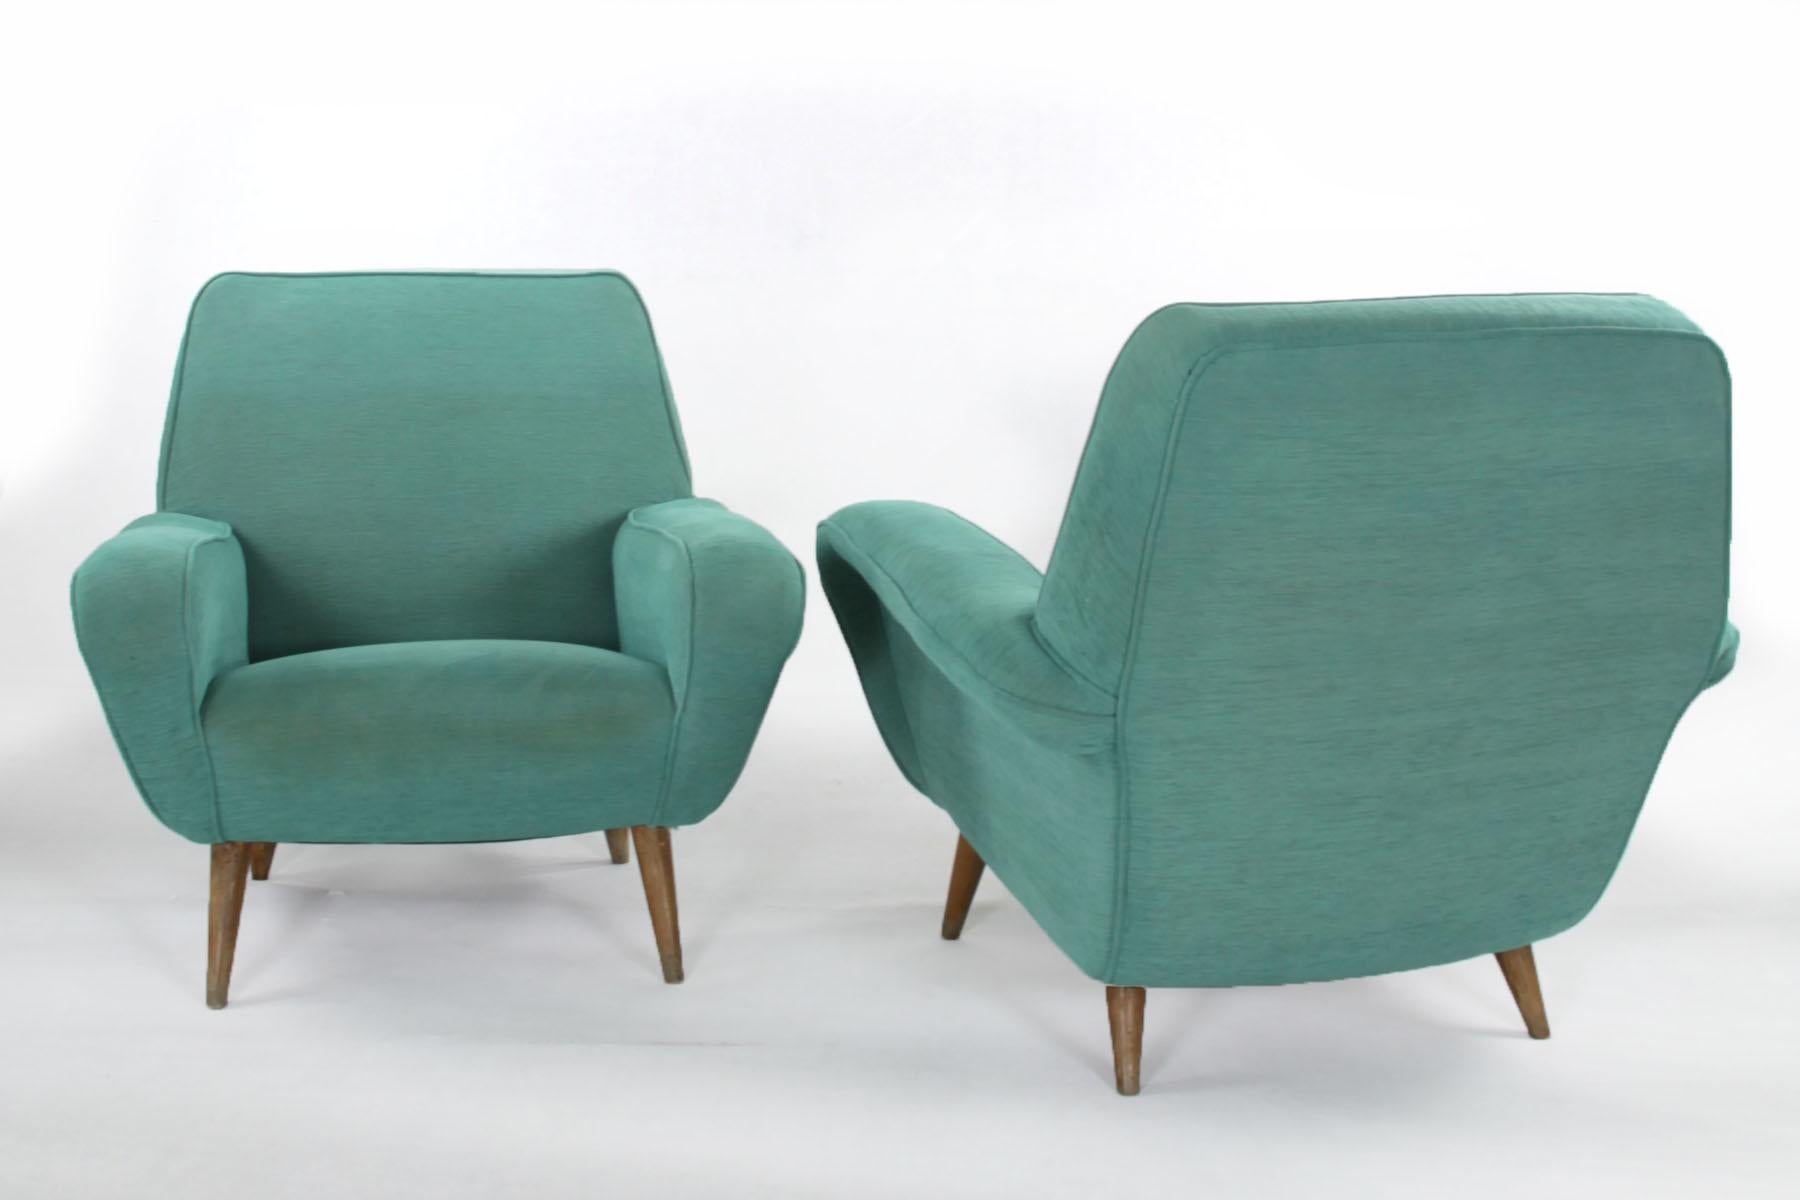 Set of 2 Gianfranco Frattini Chairs Modell 830, 1950s, Cassina, Italy For Sale 2